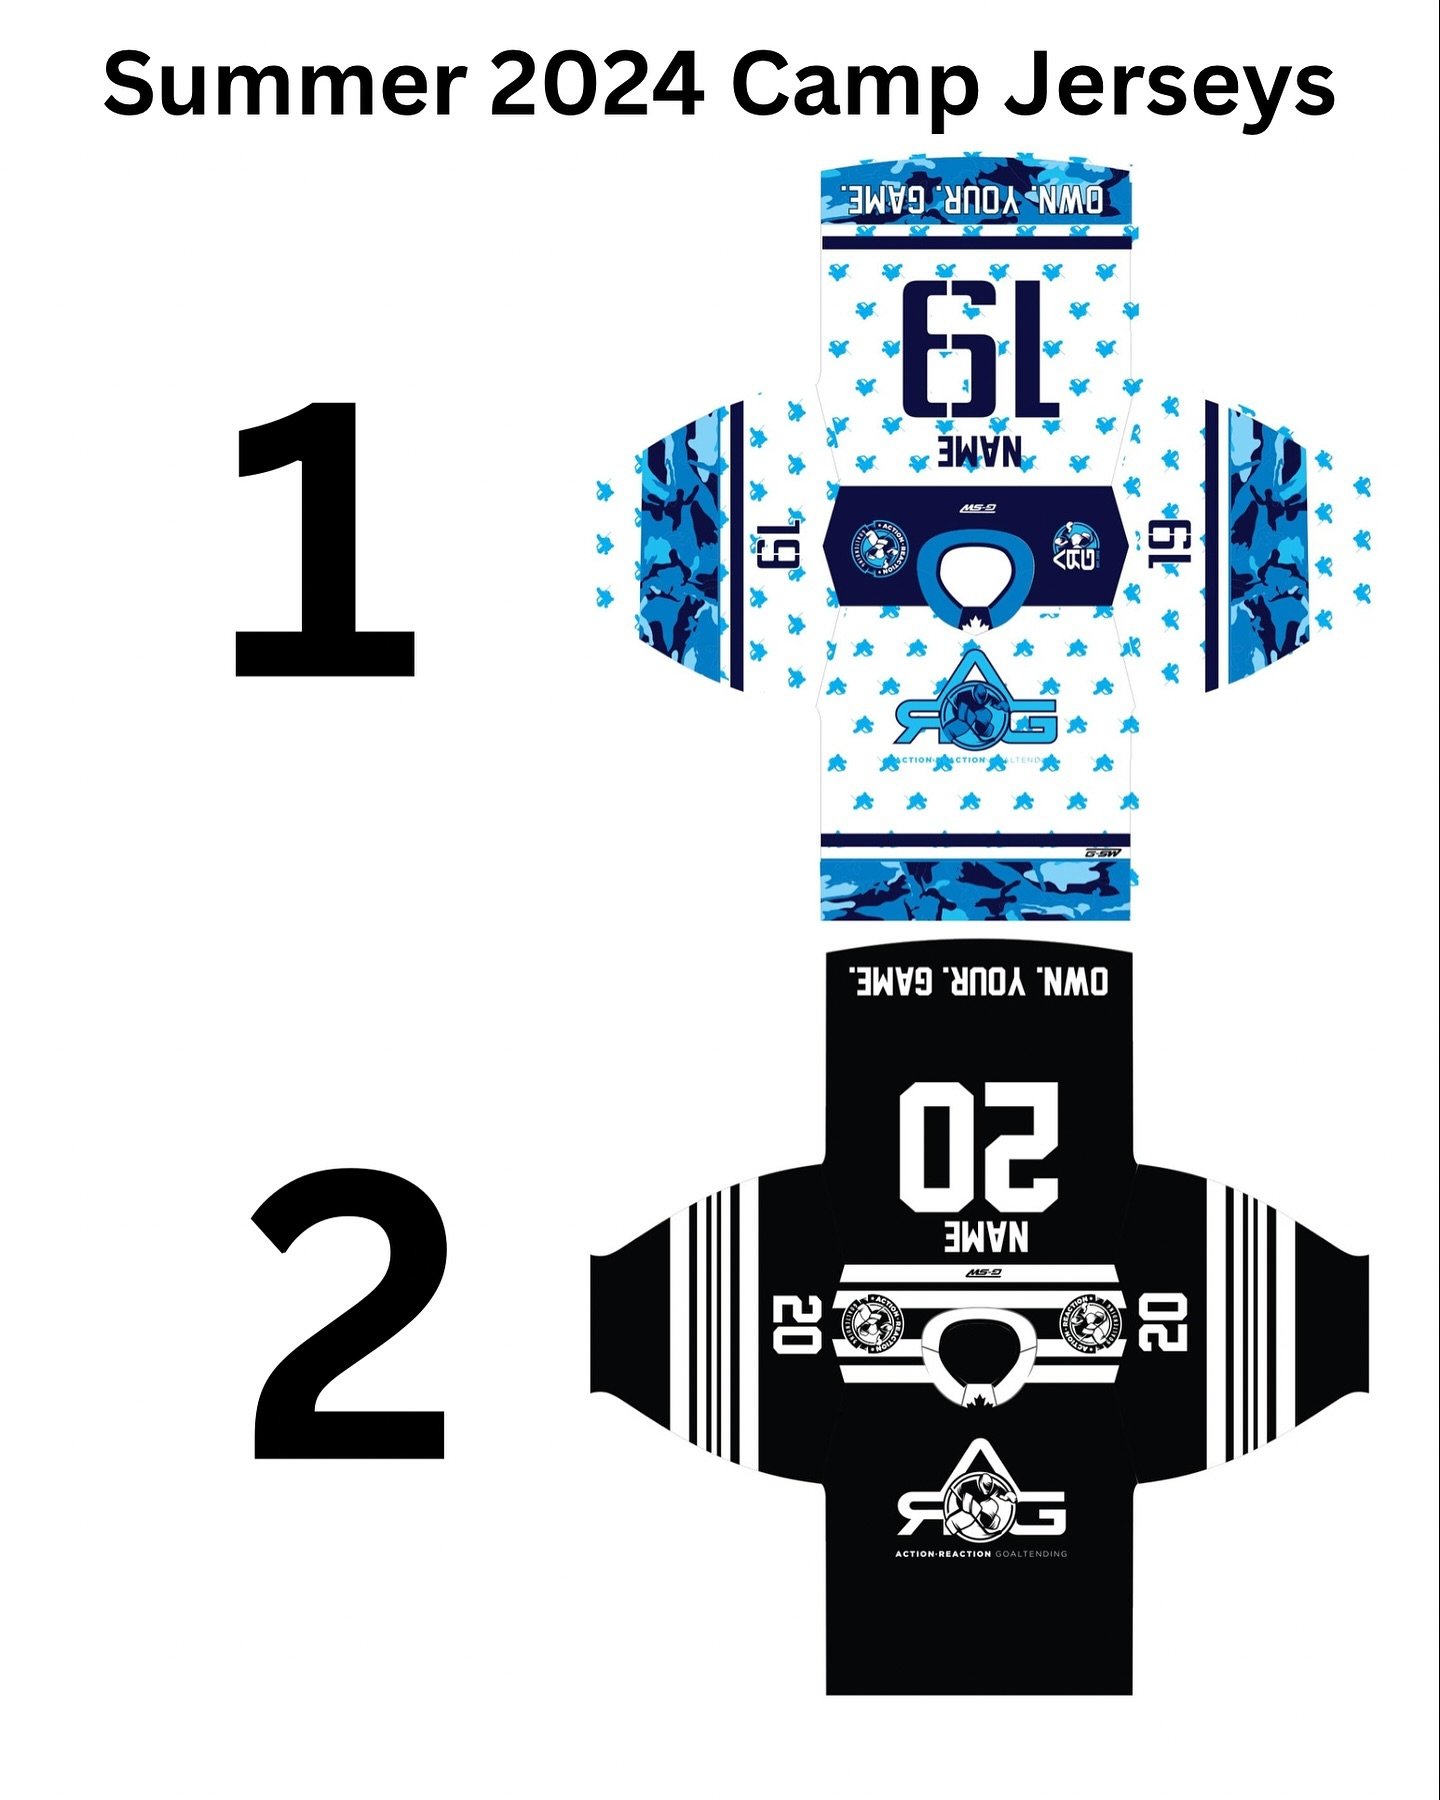 Thanks for everyone who participated in our jersey selections for our goalies this summer! Here are the 2 beauties!